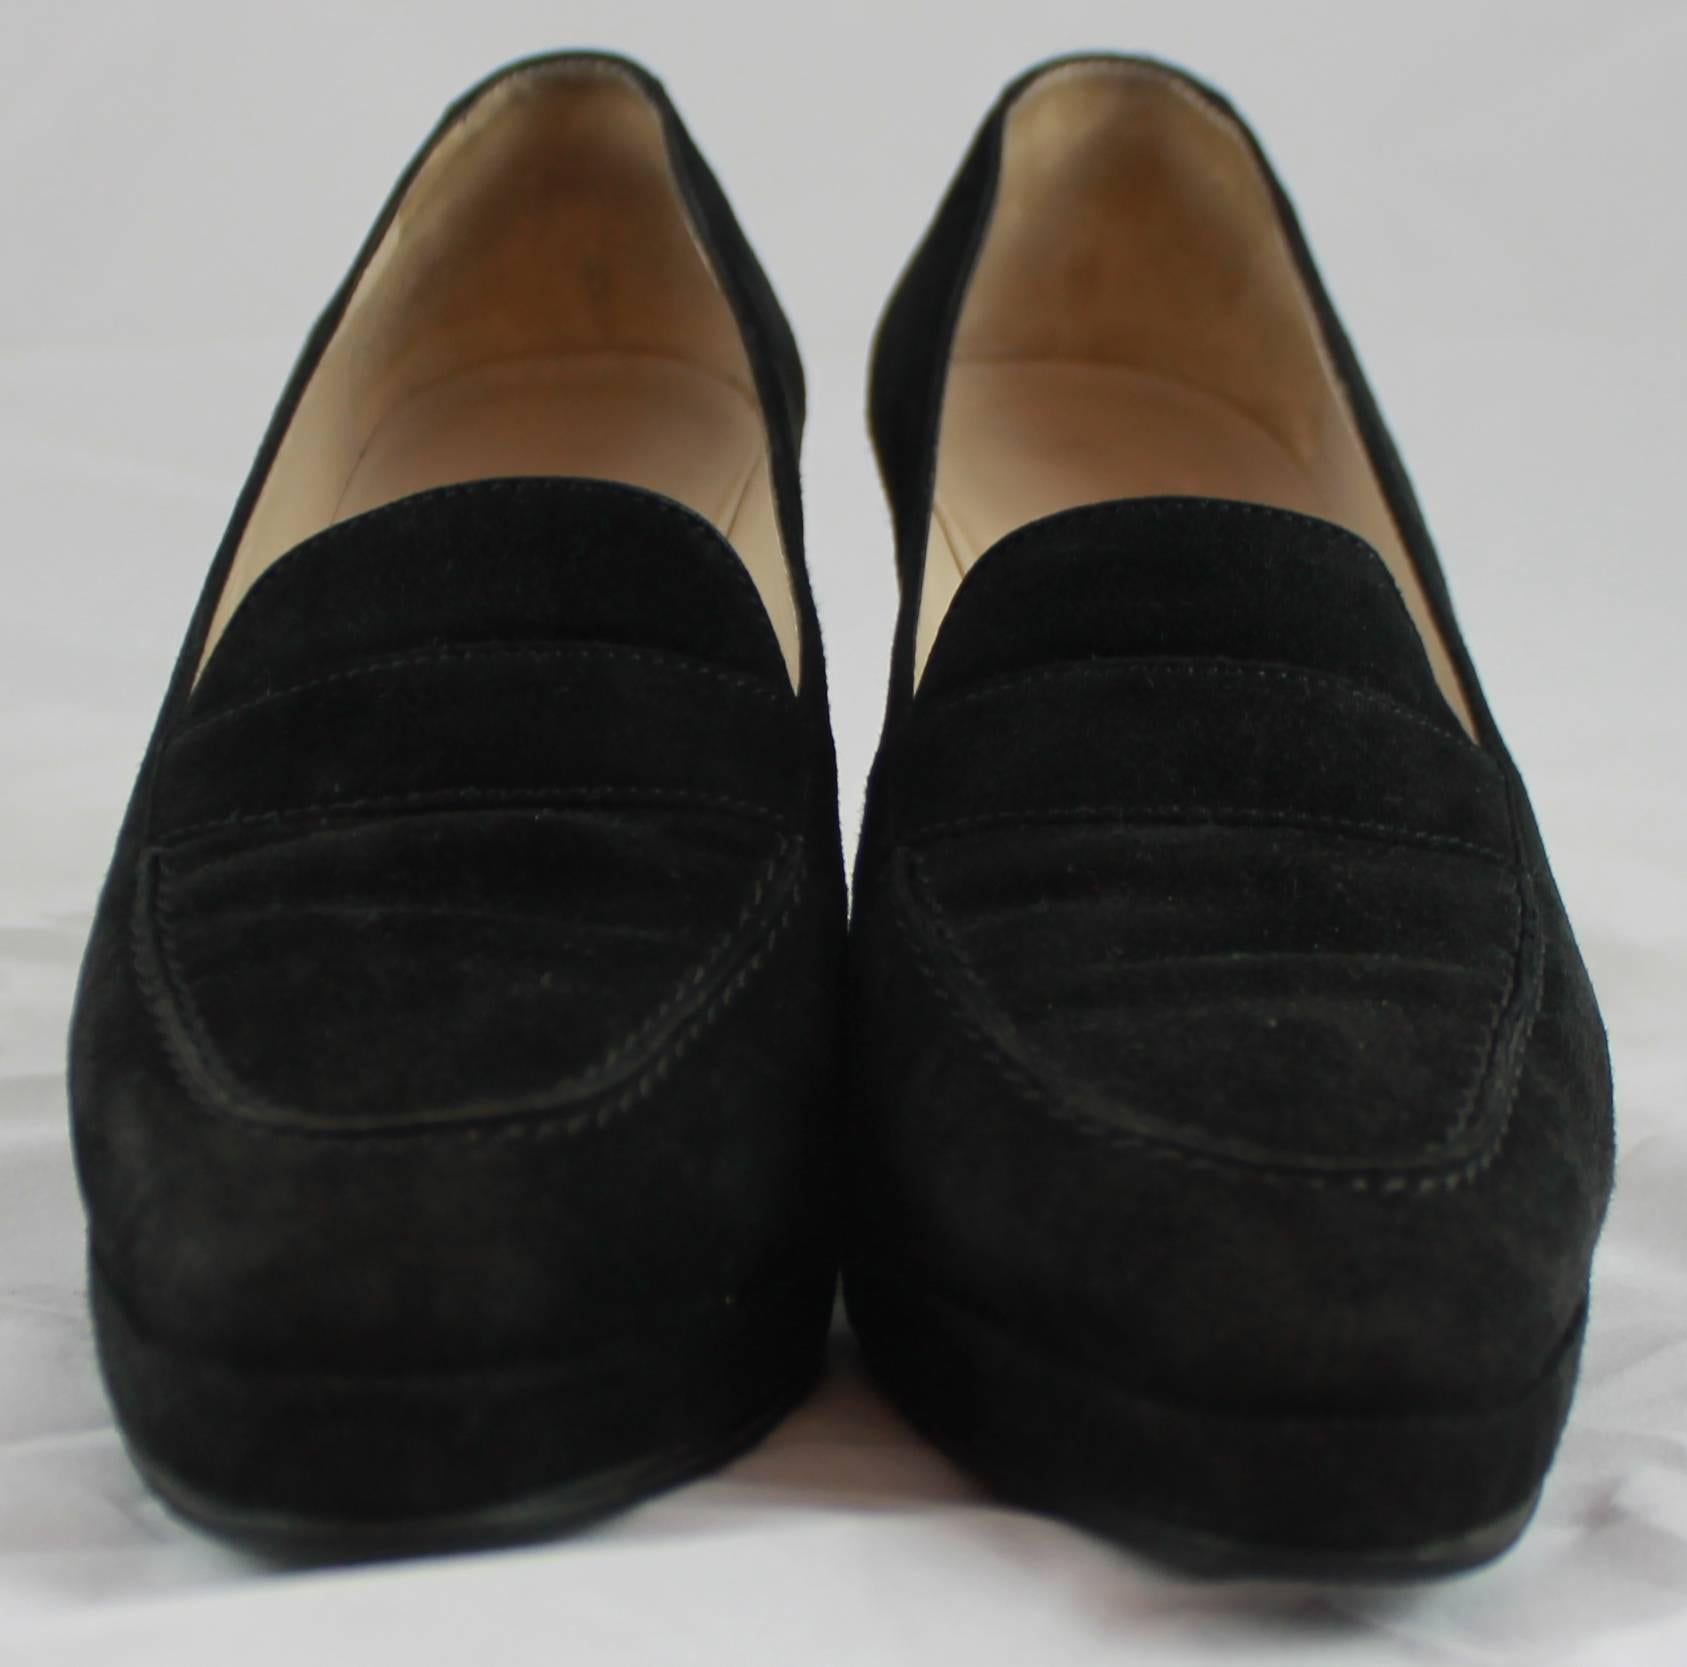 Chanel Black Suede Loafer Style Pumps - 36.5 1